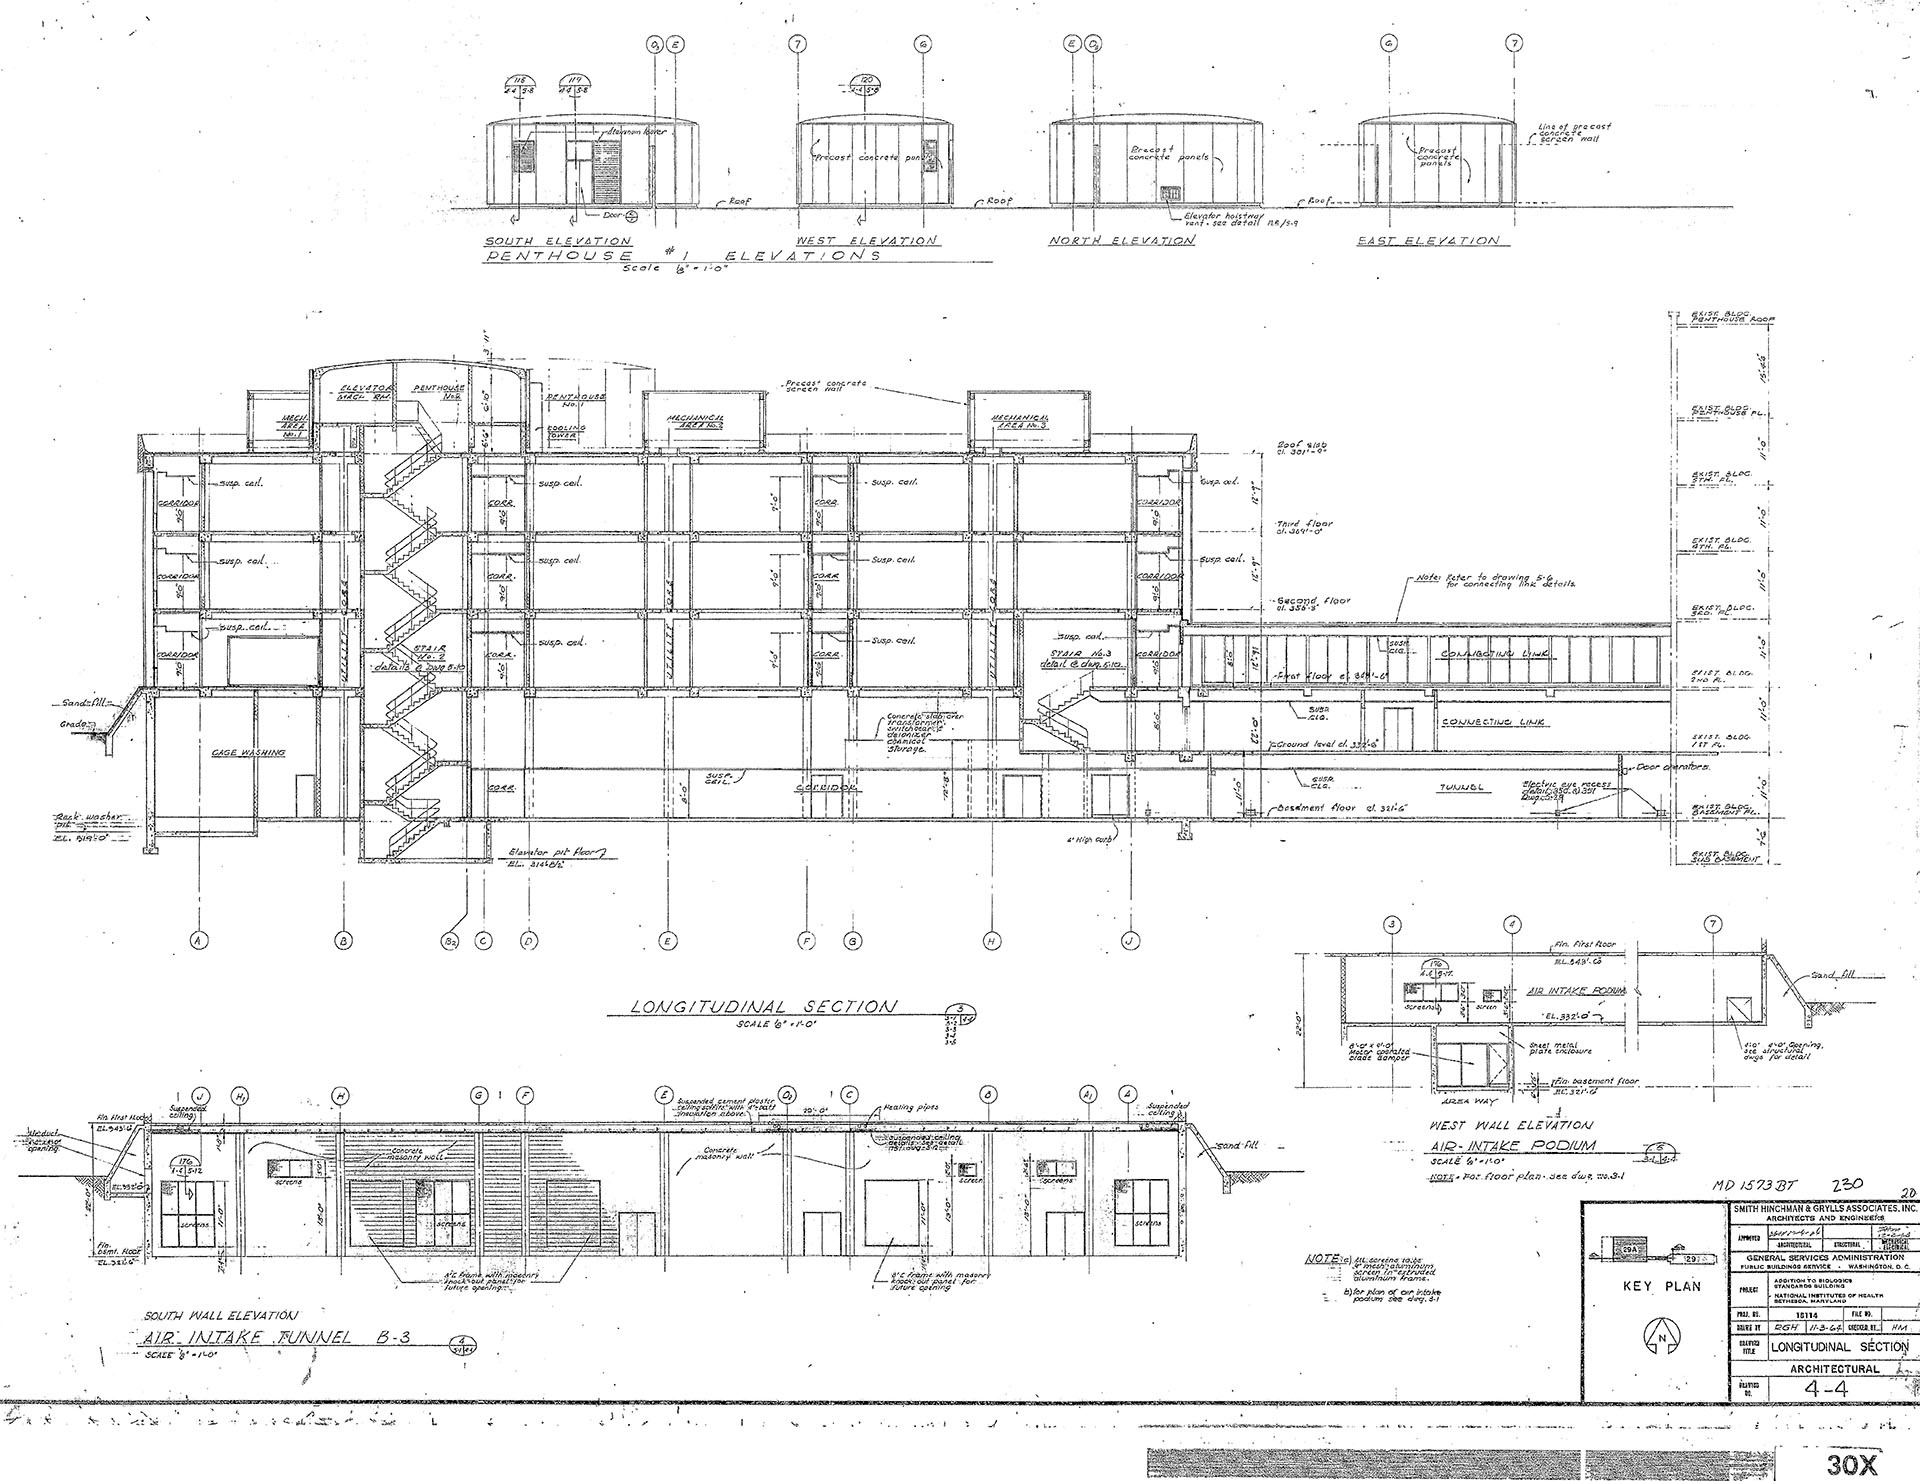 Longitudinal section drawing of Building 29A.